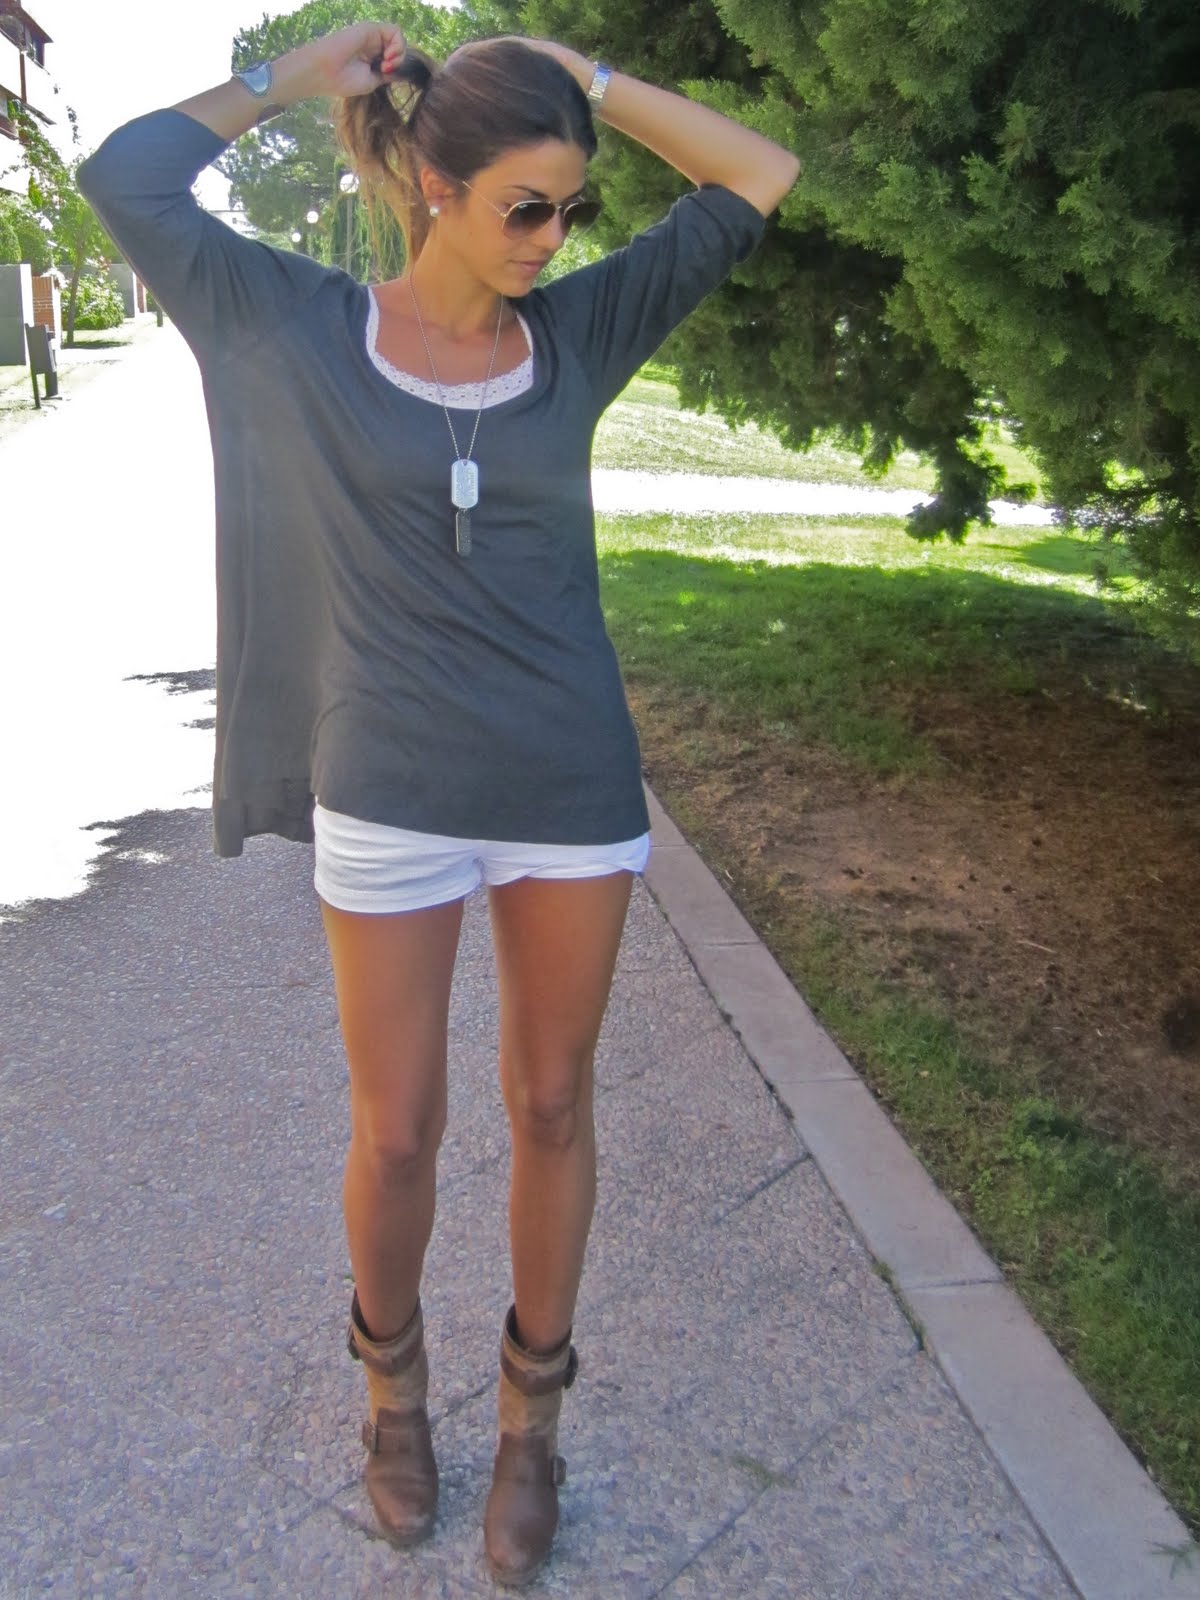 grey top + white shorts | Attire women, Chic outfits, Fashion